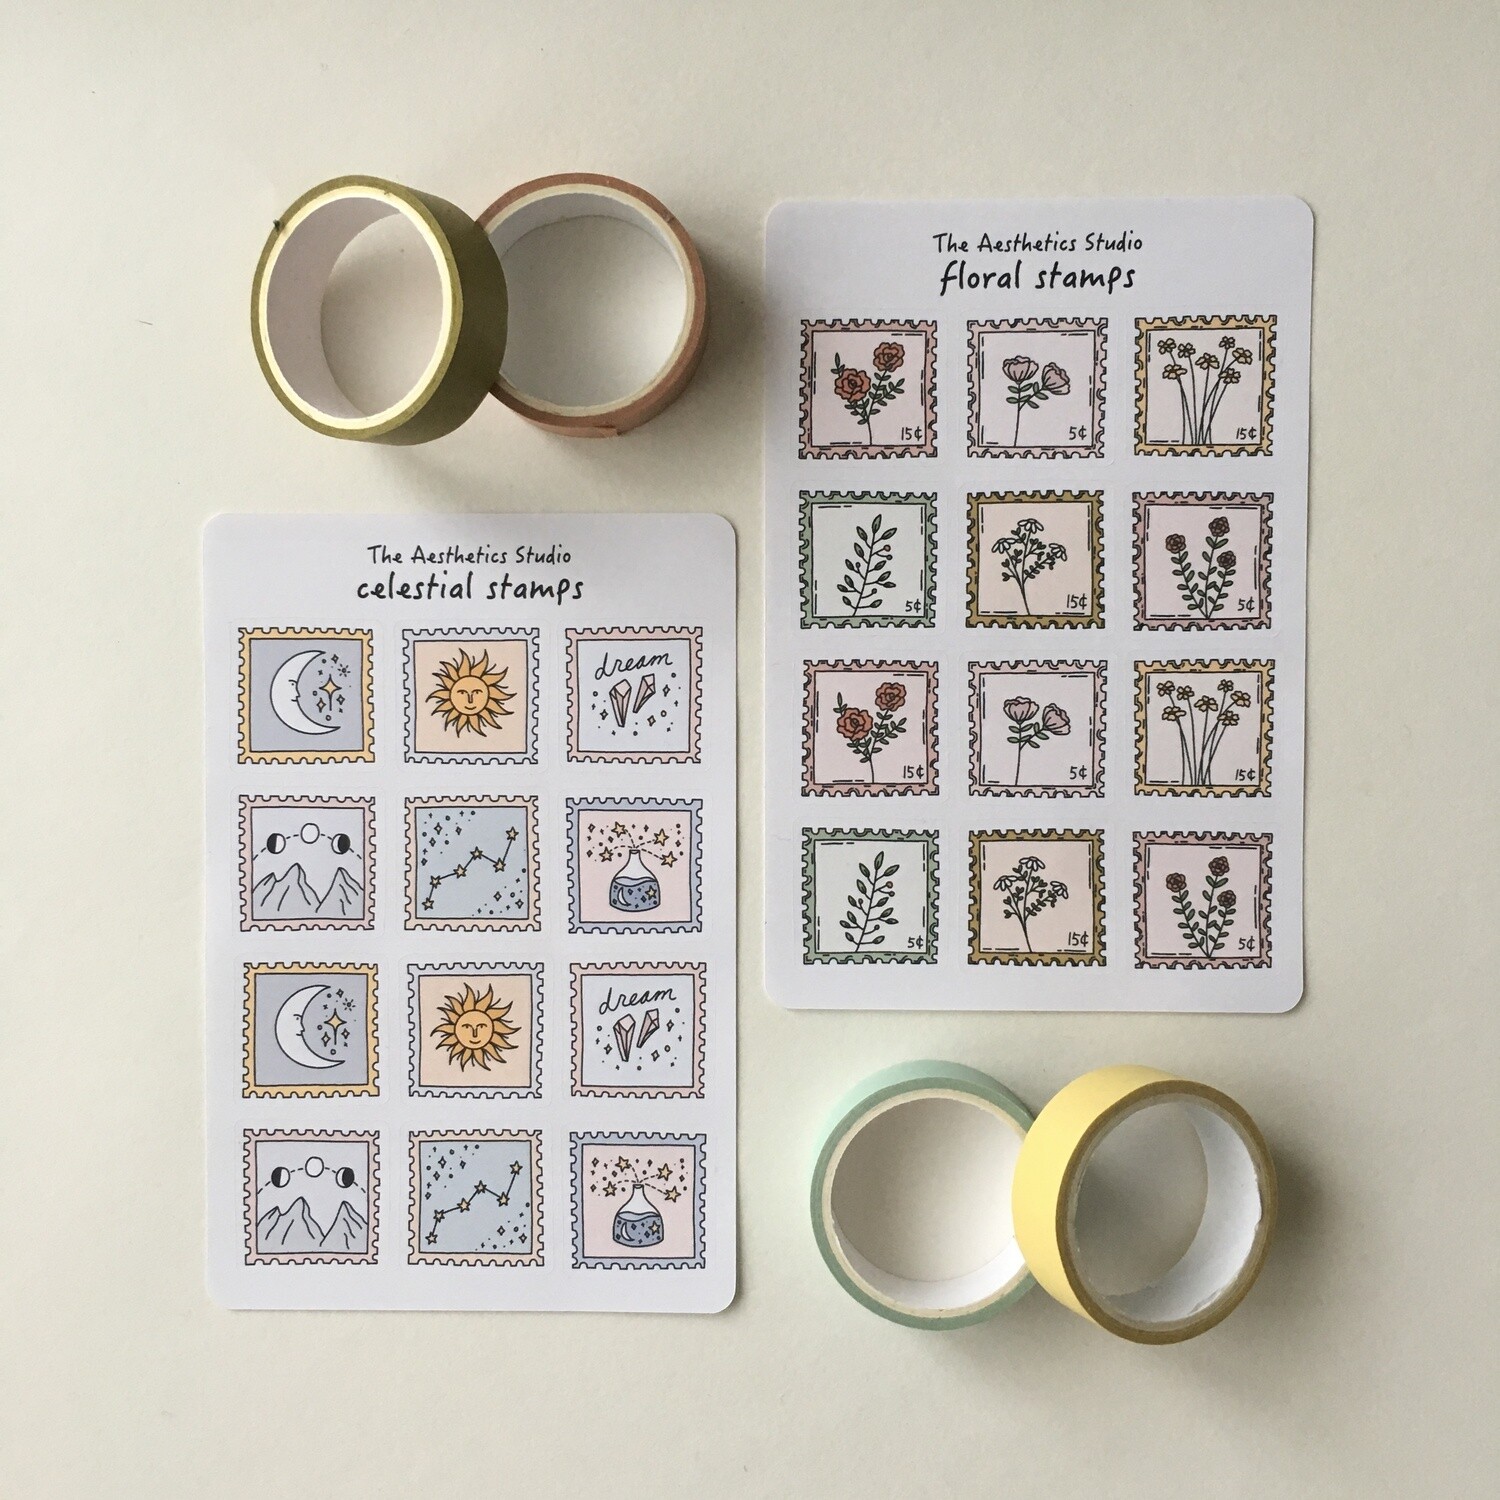 celestial stamps and floral stamps sticker sheet